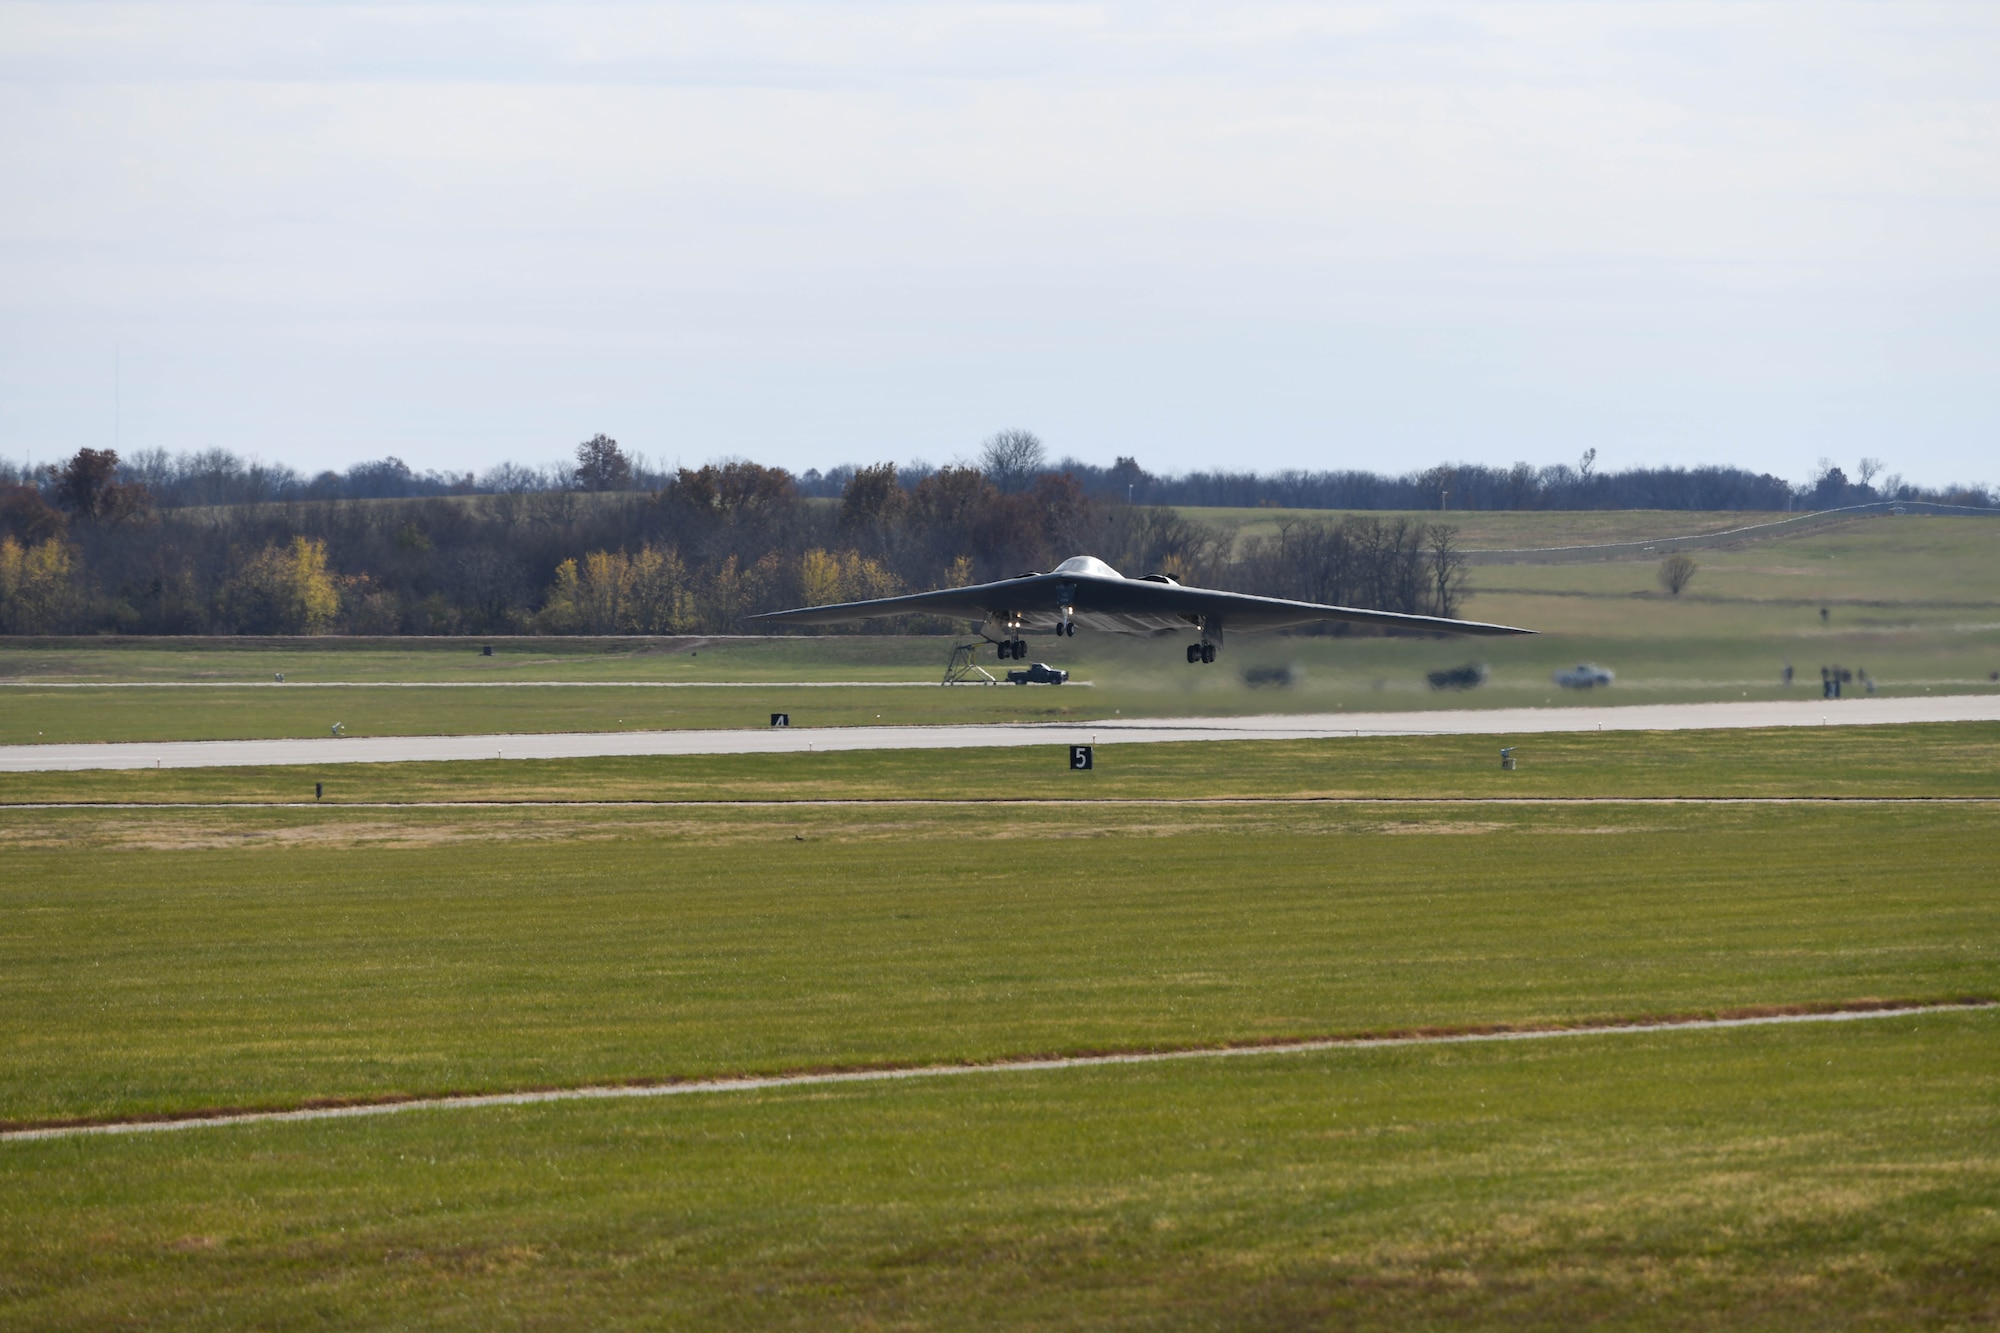 A B-2 Spirit stealth bombers assigned to the 509th Bomb Wing taxis to the runway at Whiteman Air Force Base, Missouri November 7, 2022. The B-2 participated in Spirit Vigilance, a routine training exercise designed to test the wing's readiness to conduct deterrence and combat operations. (U.S. Air Force photo by Airman 1st Class Hailey Farrell)